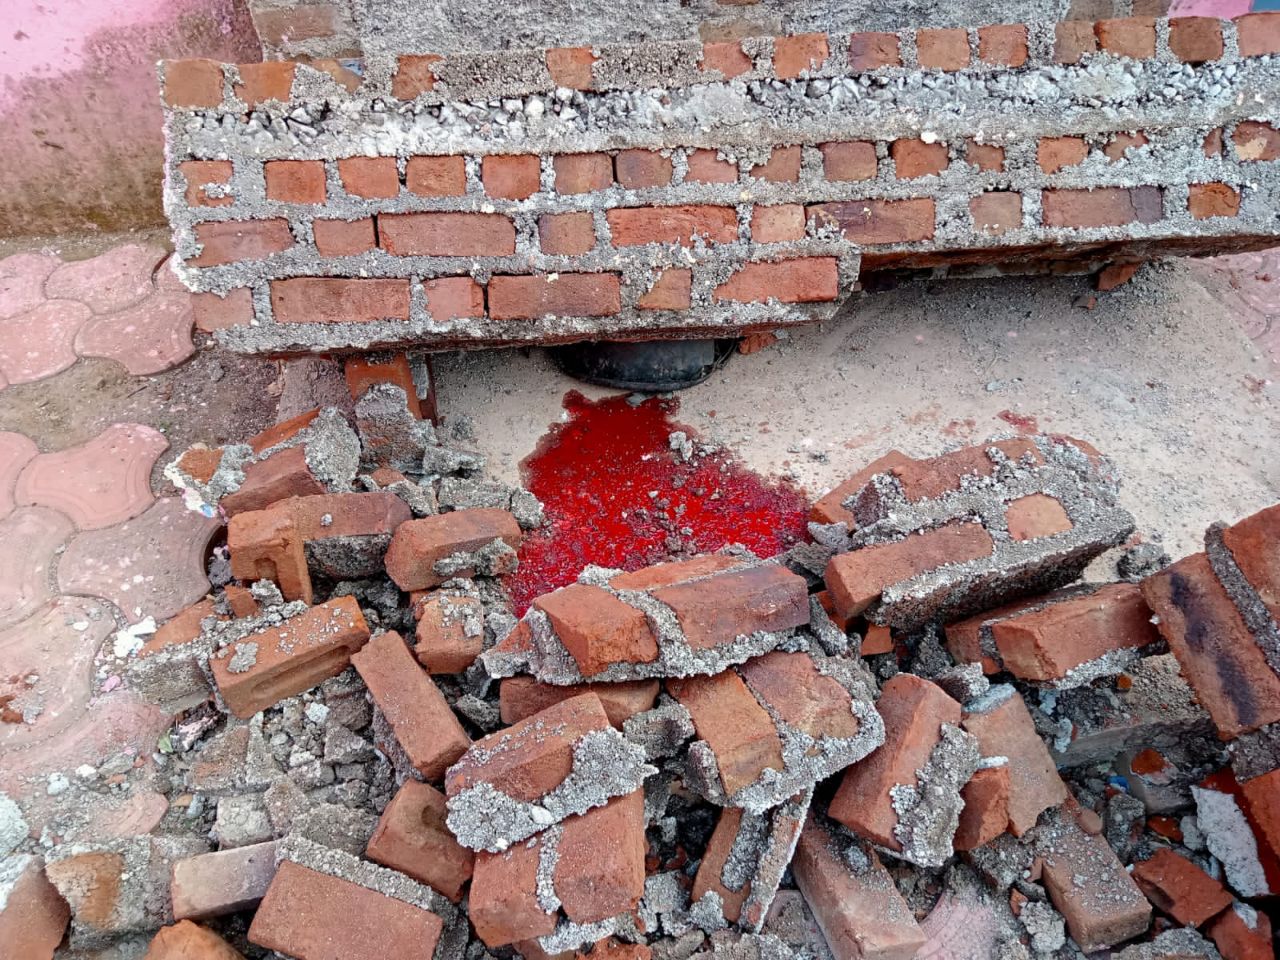 One girl student died, three girl students injured due to the fall of the wall of the building being constructed in the school